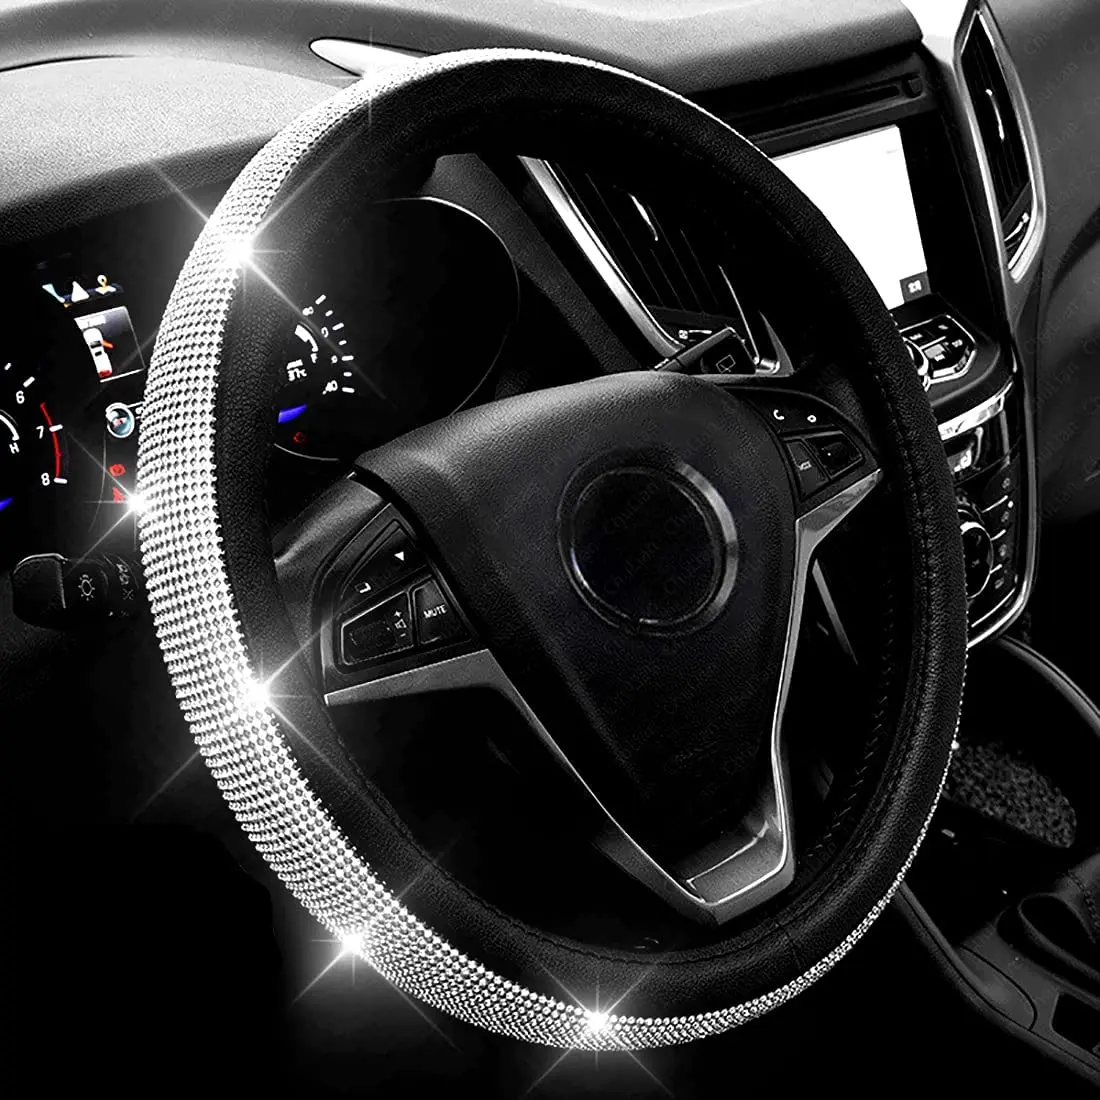 Diamond Leather Steering Wheel Cover for Women Girls,Black with Bling Bling Crystal Rhinestones LABBYWAY Steering Wheel Cover Universal Fit 15 inch 